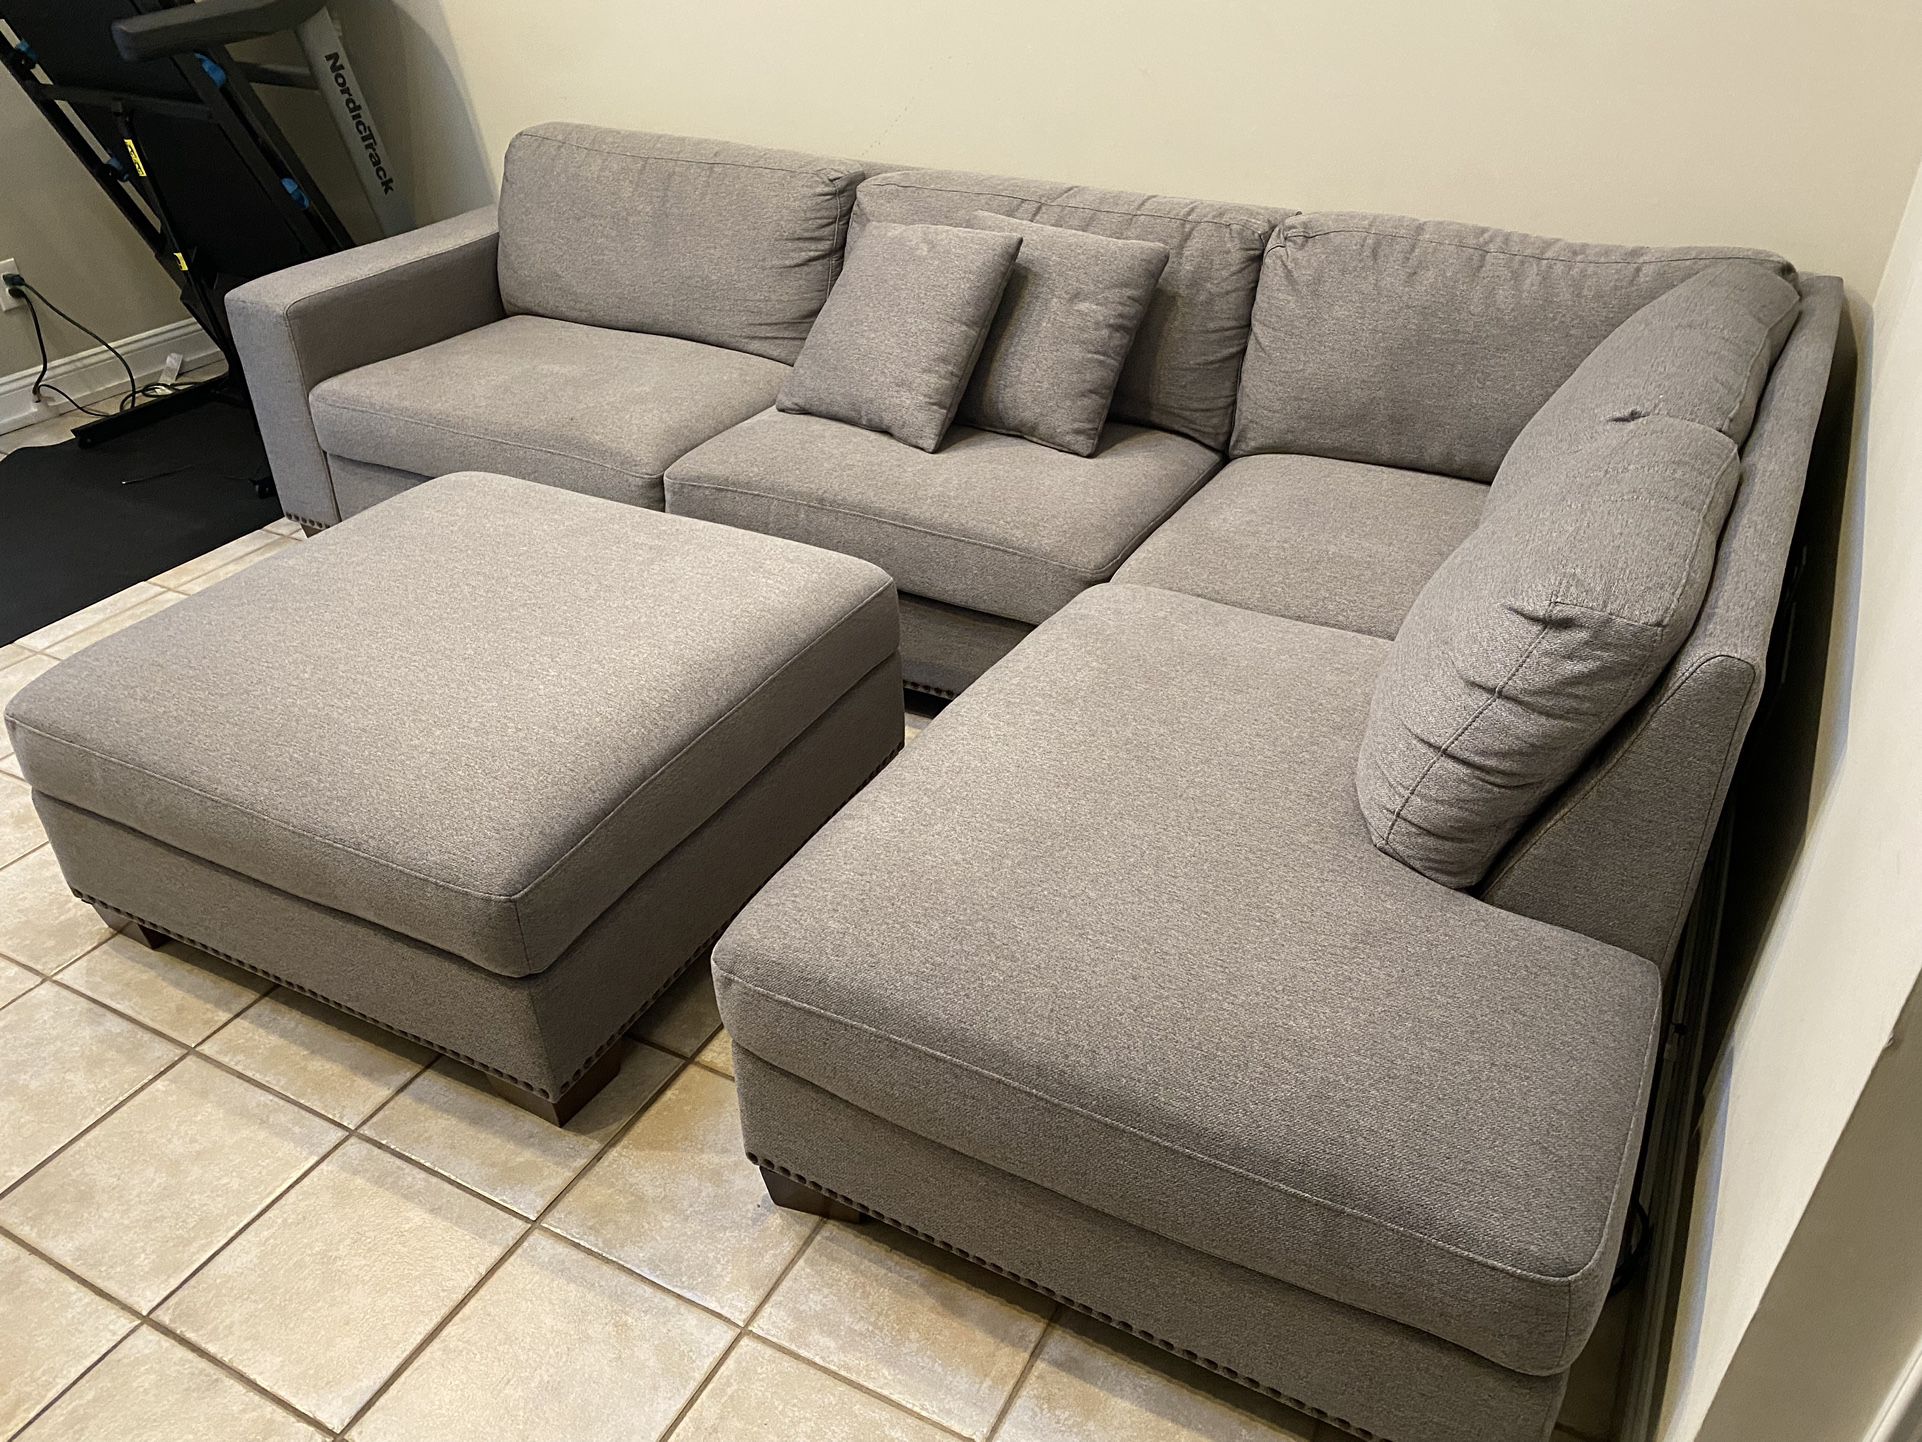 FREE DELIVERY AND INSTALLATION - Costco Fabric Sectional Gray Color (Pillows and Ottoman Included)